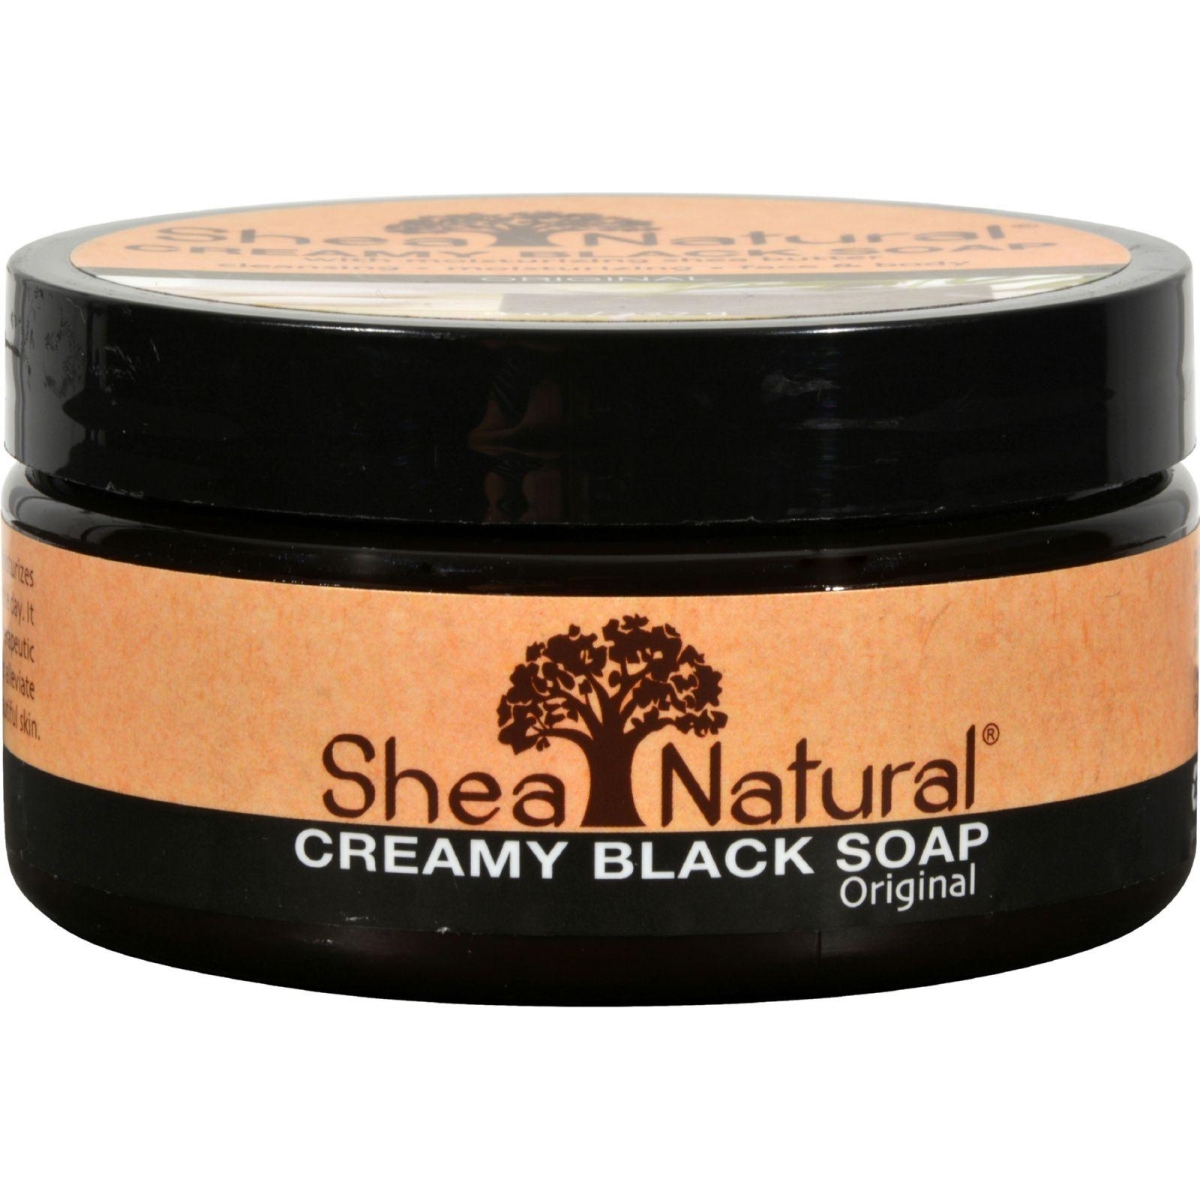 Hg1091321 8 Oz African Black Soap - Creamy With Shea Butter